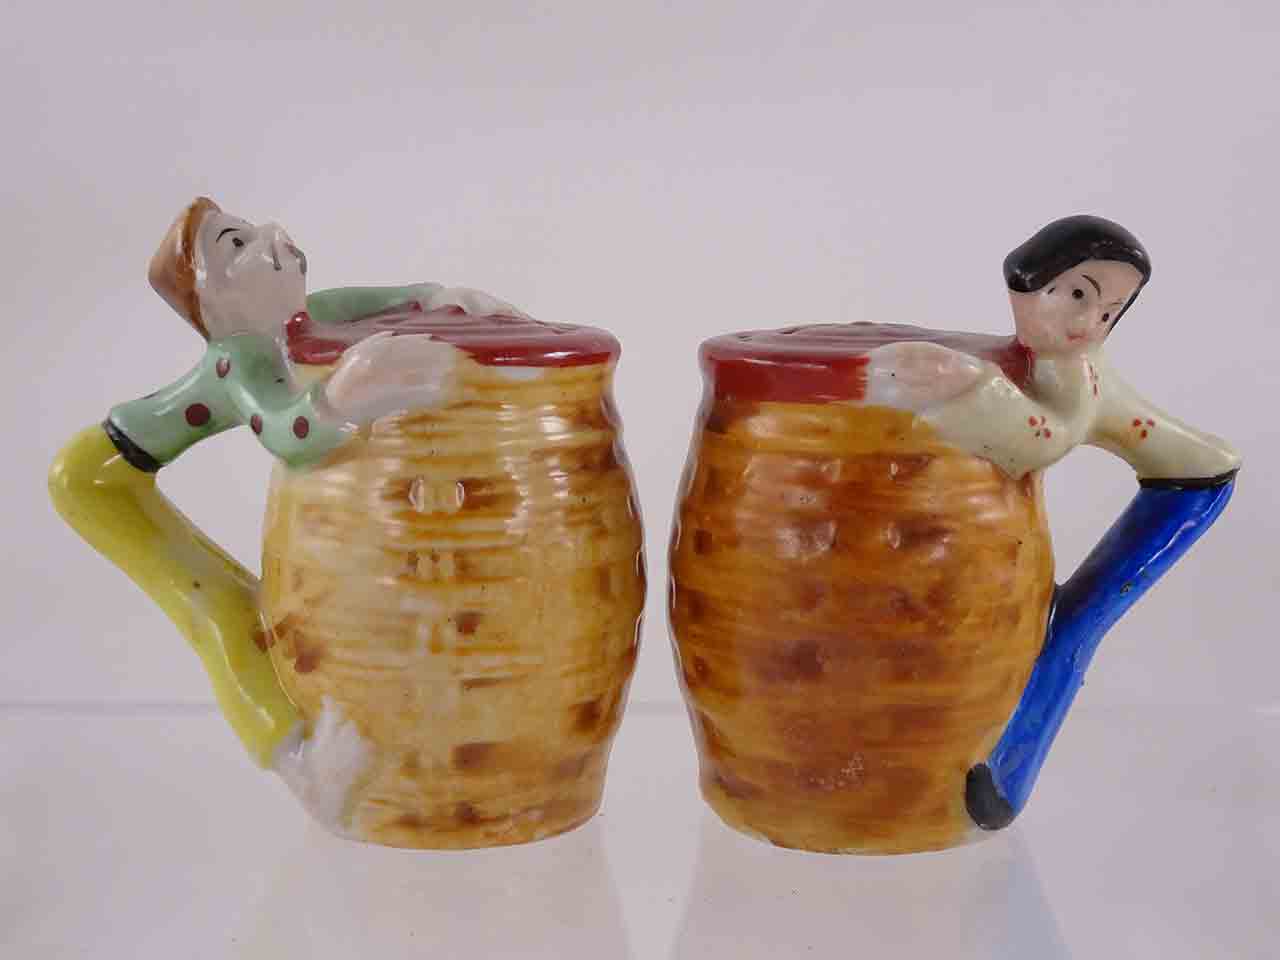 People hanging off sides of baskets salt and pepper shakers